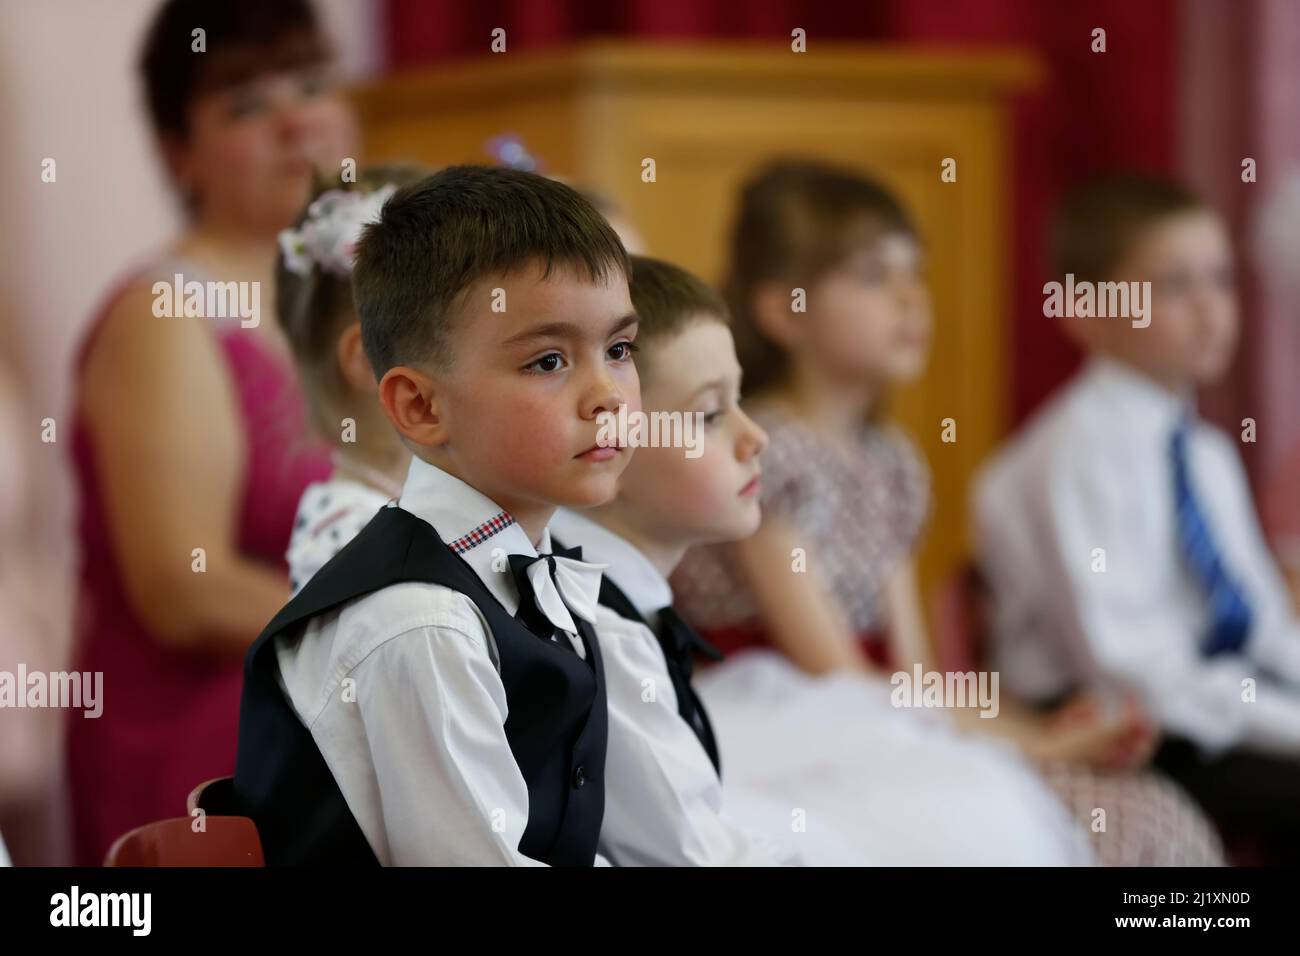 A group of children at a matinee in kindergarten. Stock Photo